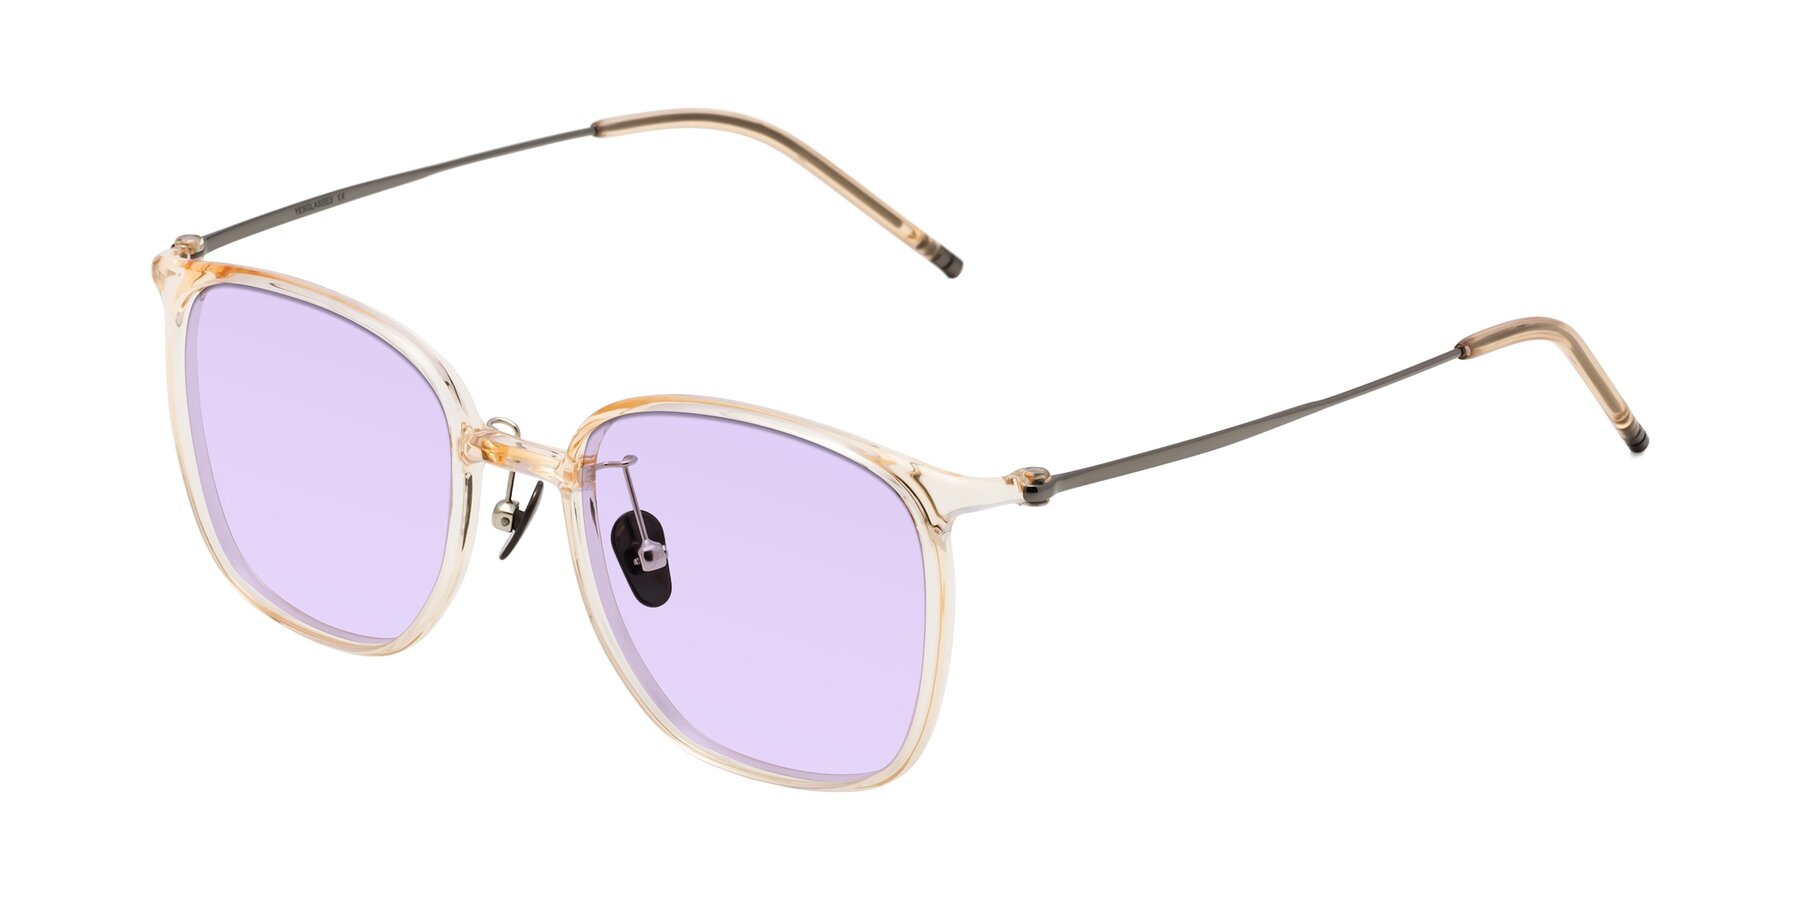 Angle of Manlius in Light Yellow with Light Purple Tinted Lenses